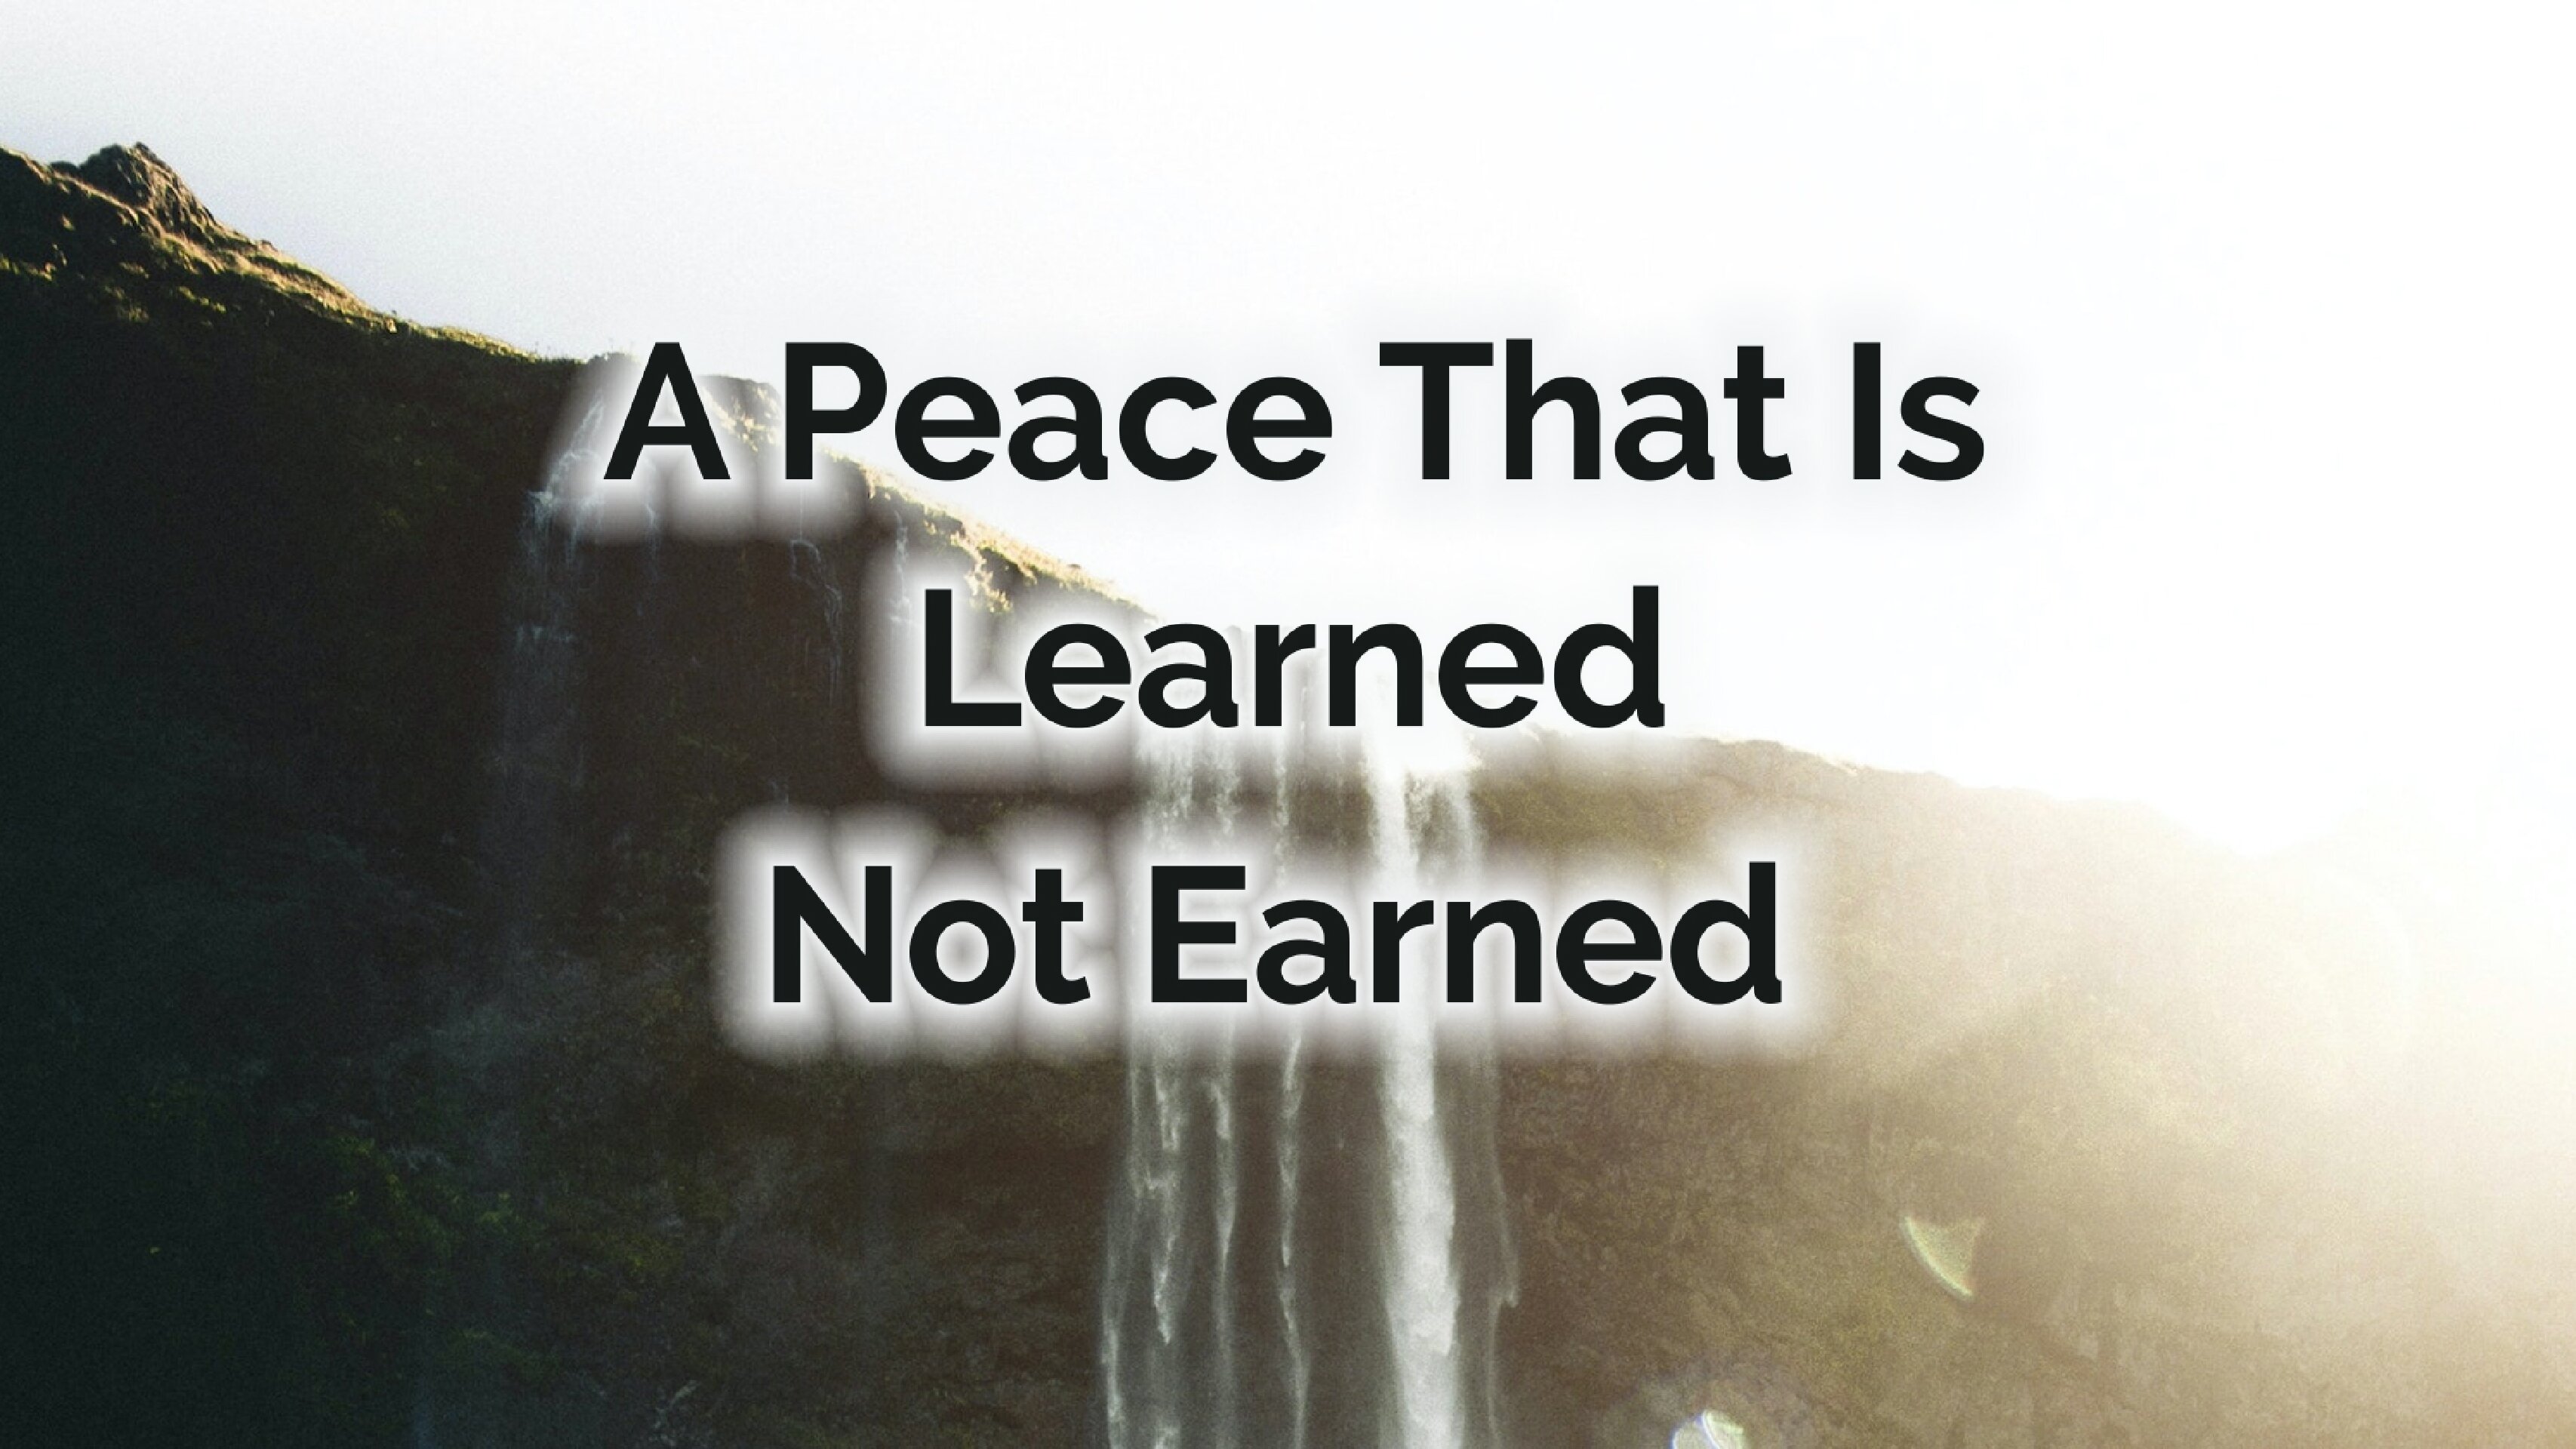 A Peace That is Learned Not Earned